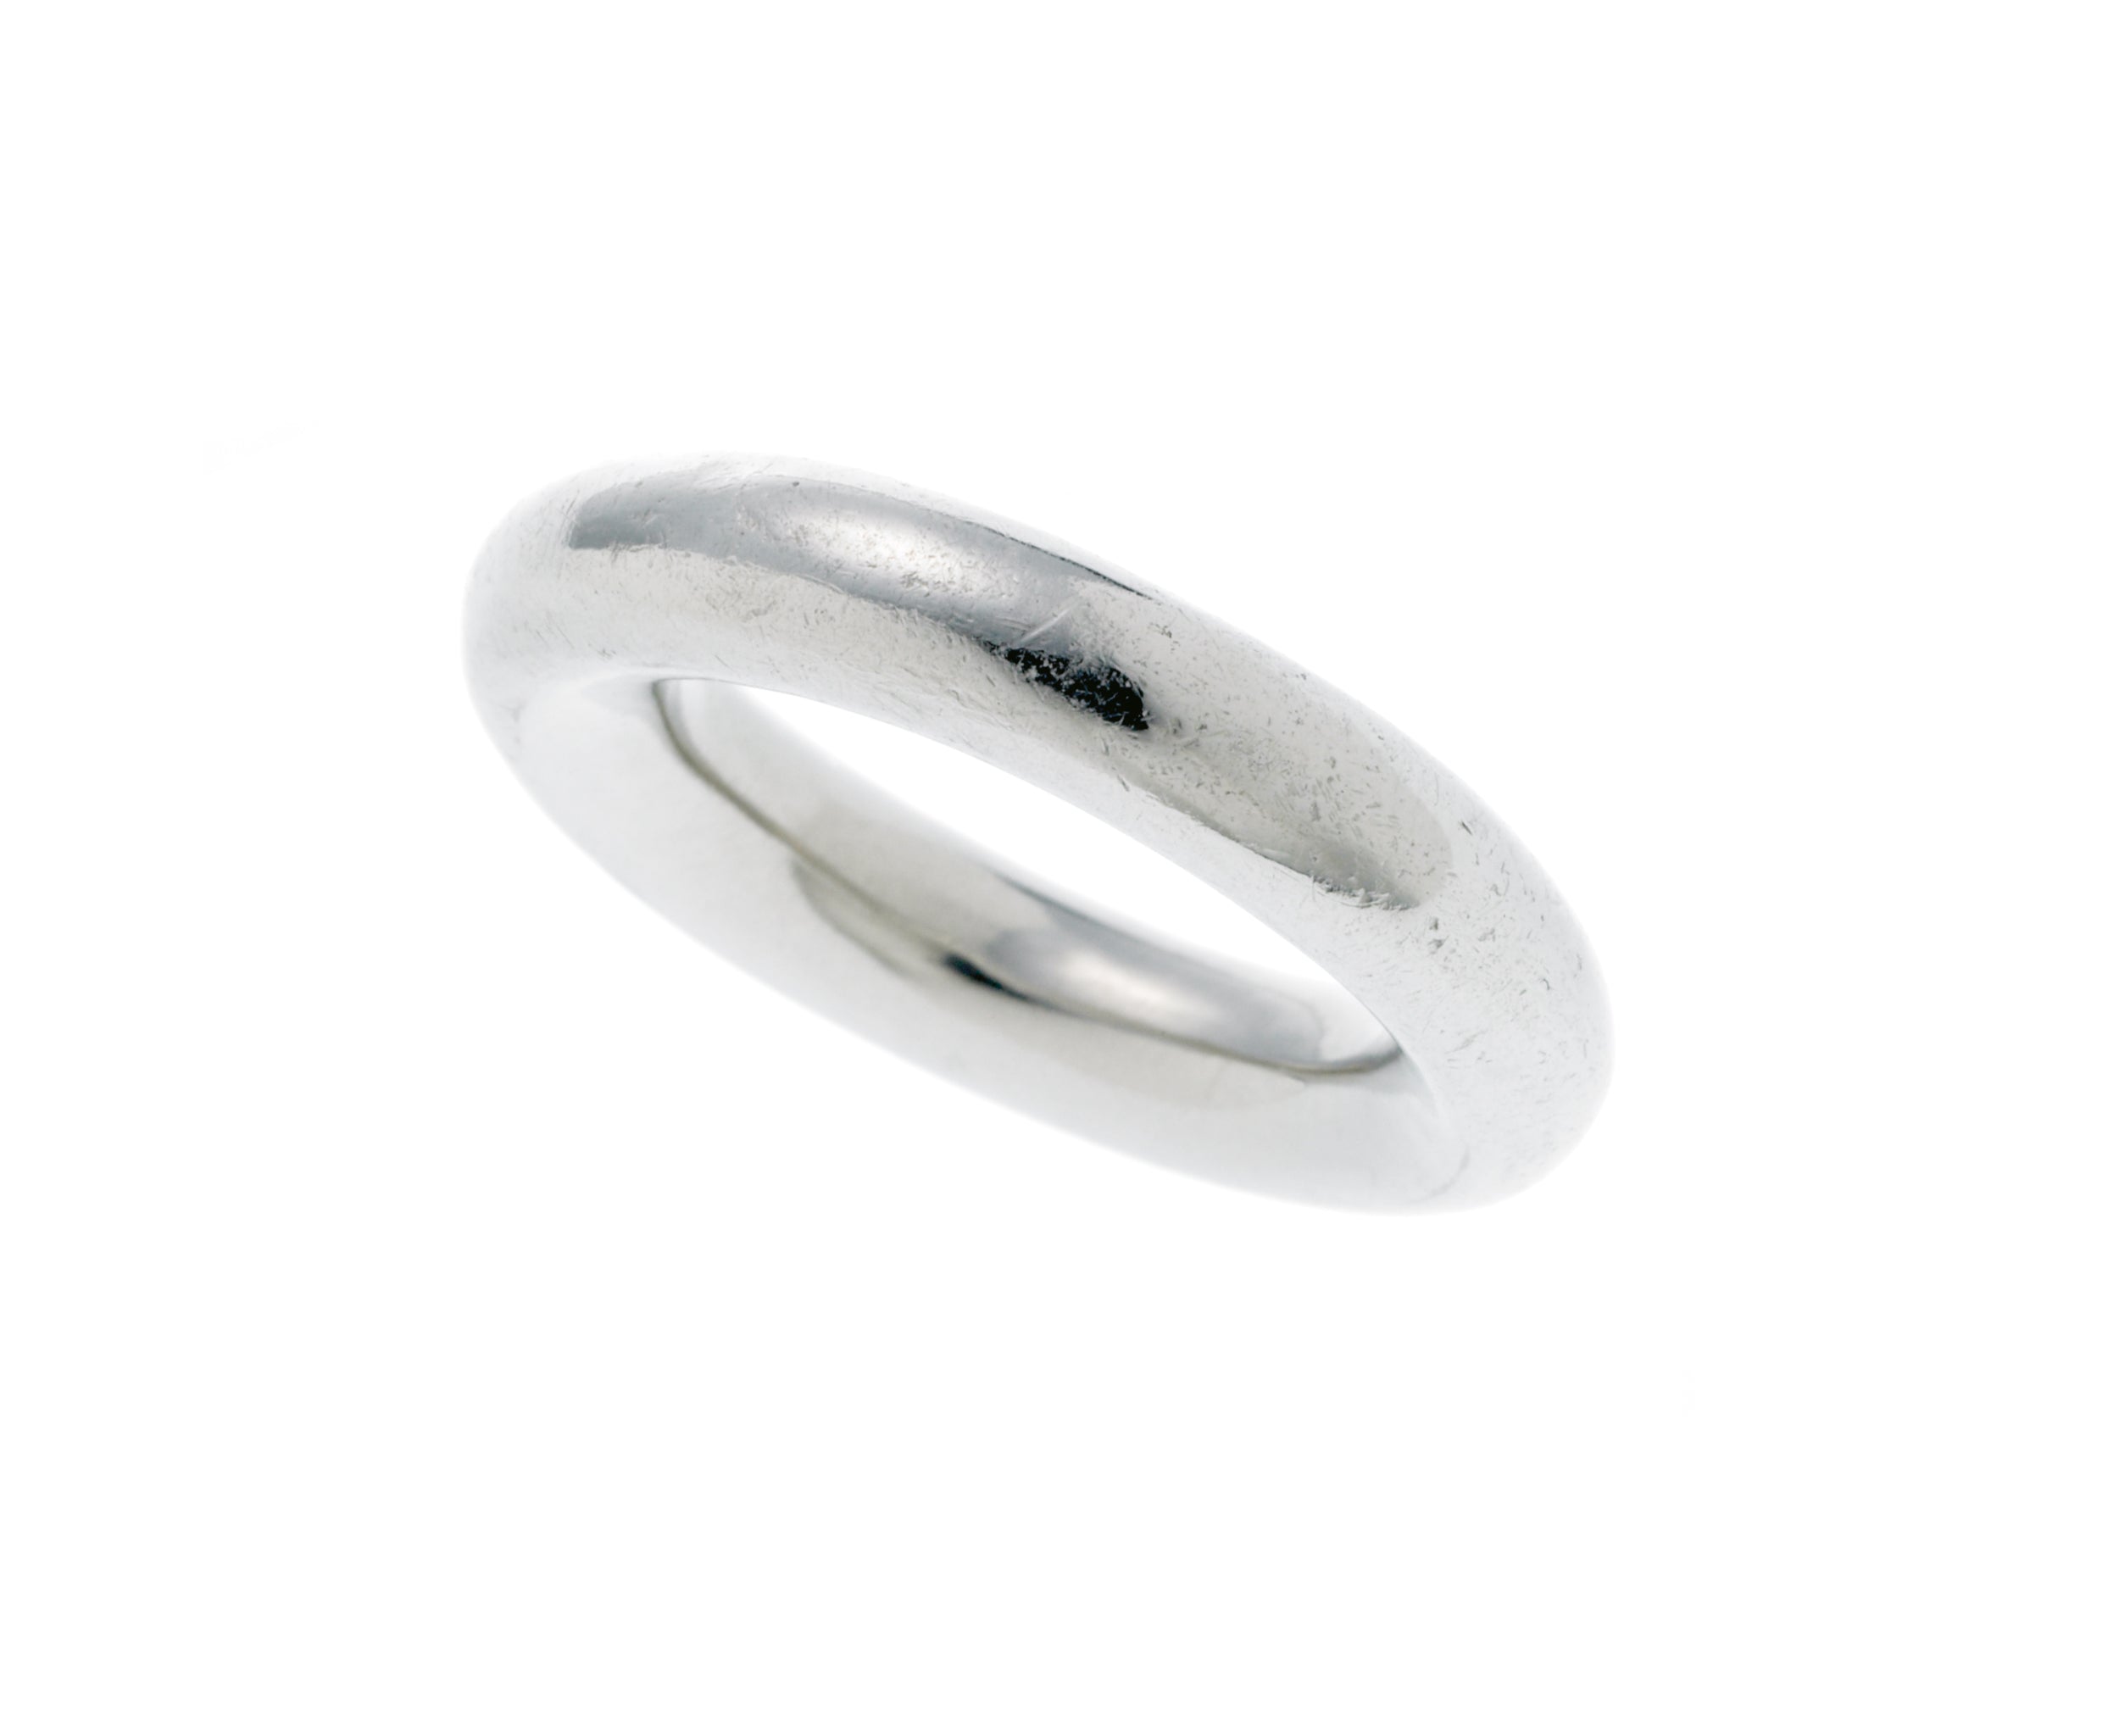 Platinum hollow formed ring – filled with Diamonds!